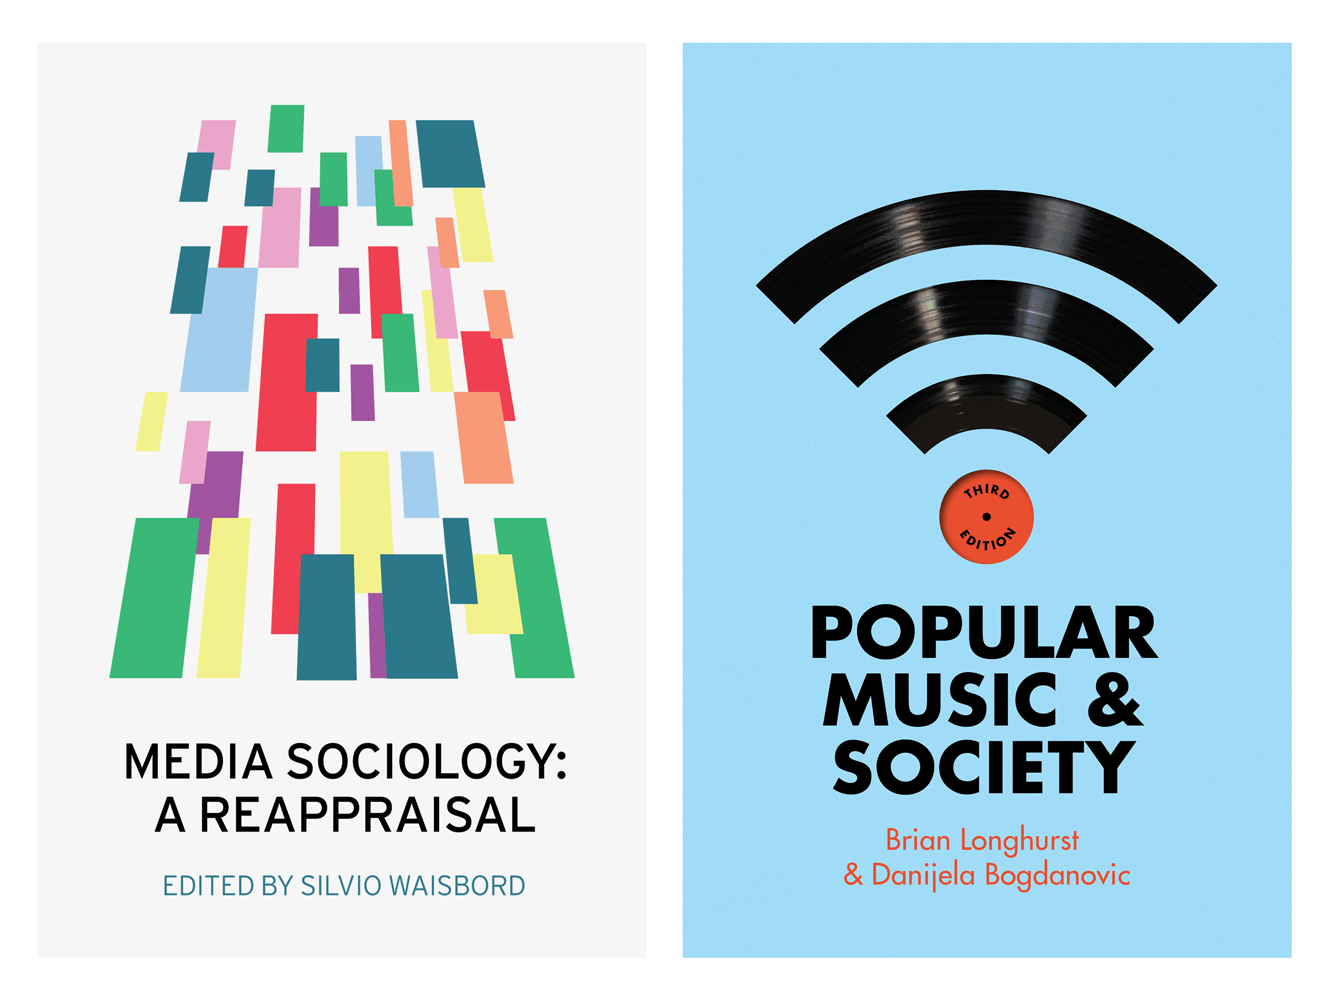 Book Cover Design For Media Sociology: A Reappraisal And Popular Music And Society By Polity Books. Designed By &&& Creative